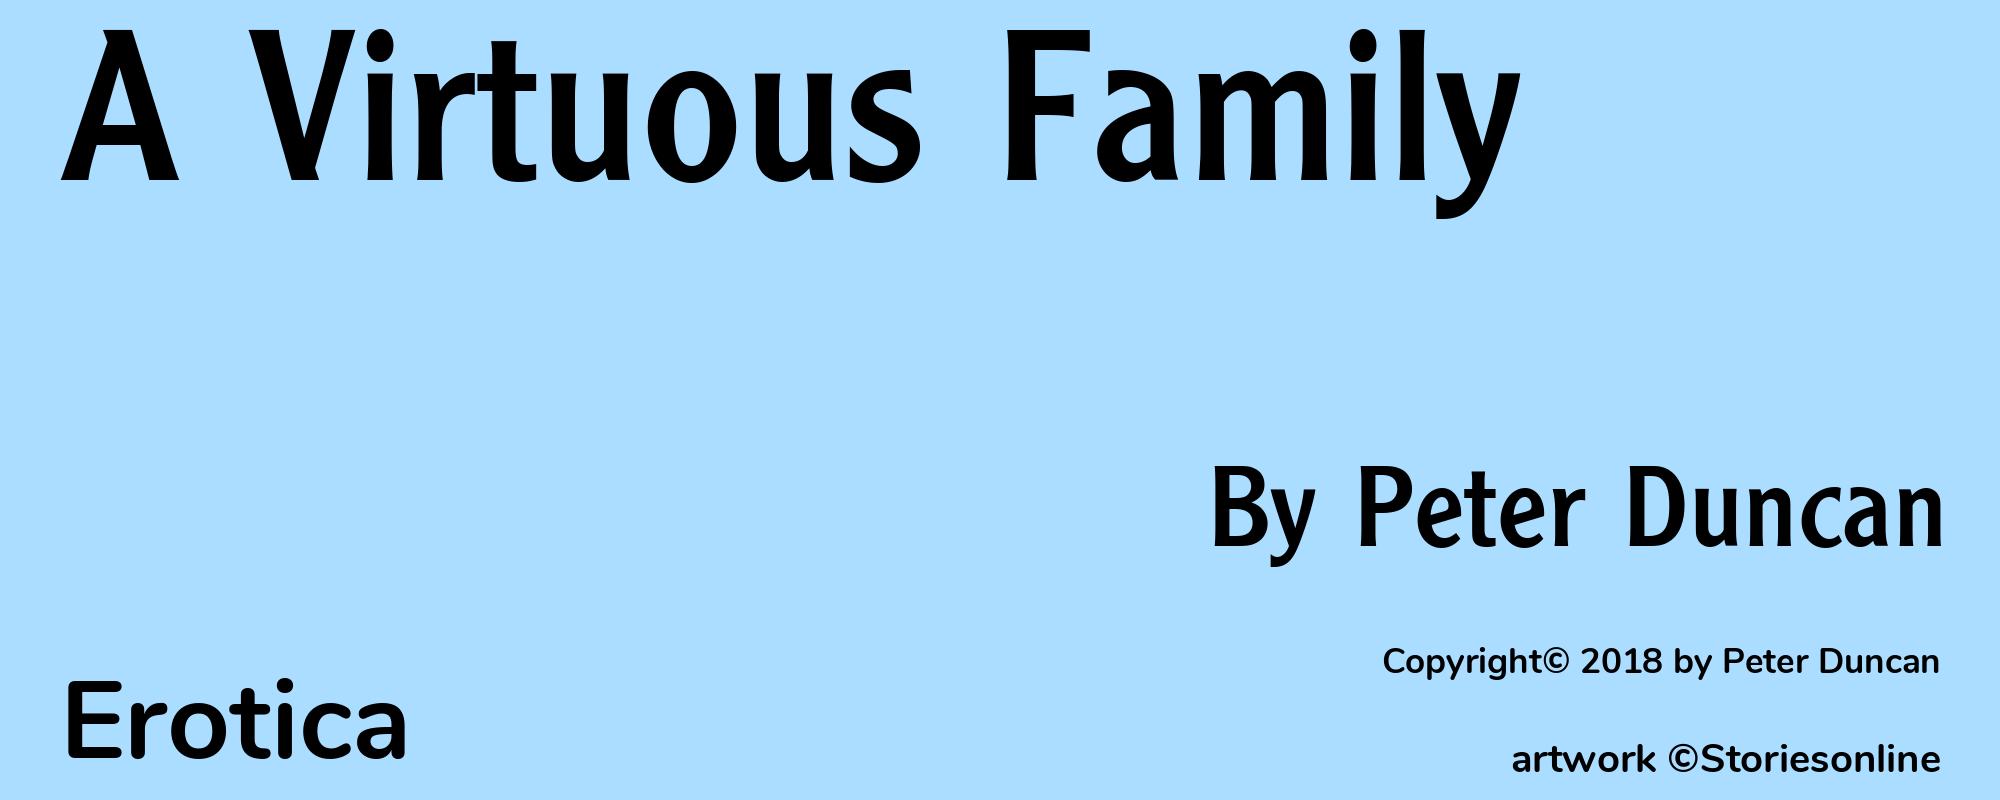 A Virtuous Family - Cover